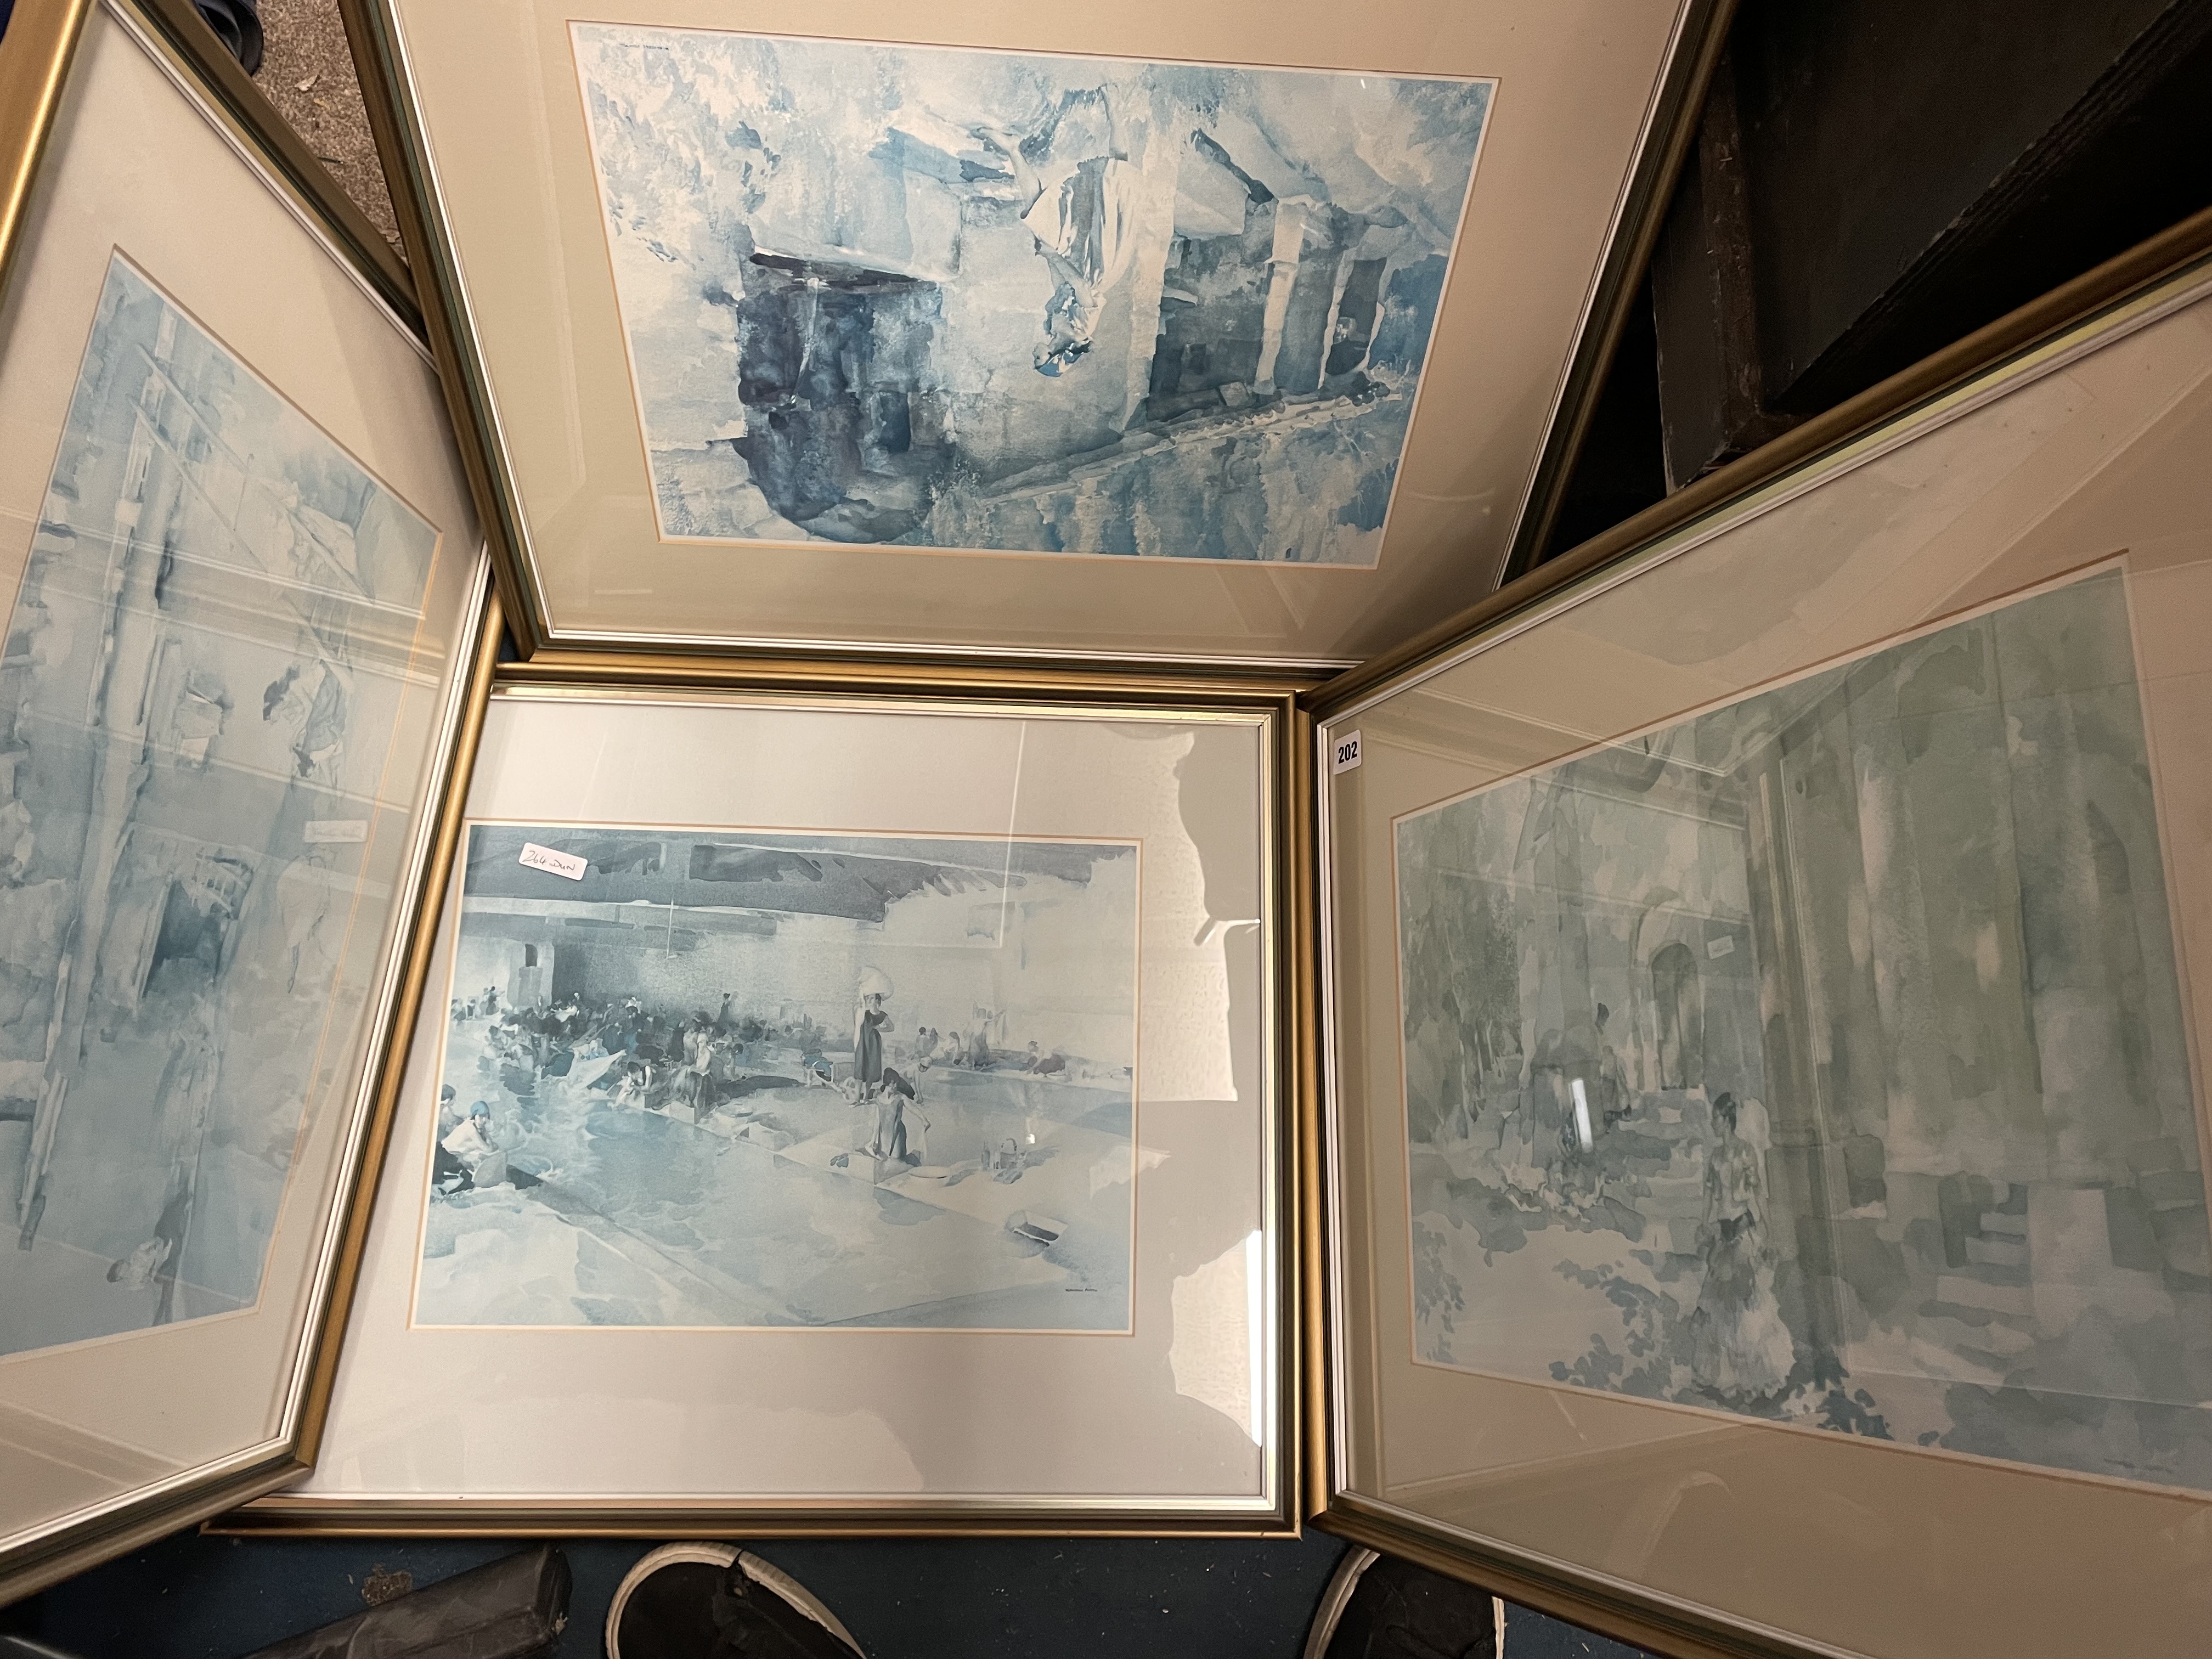 SET OF FOUR WILLIAM RUSSELL FLINT PRINTS FRAMED AND GLAZED